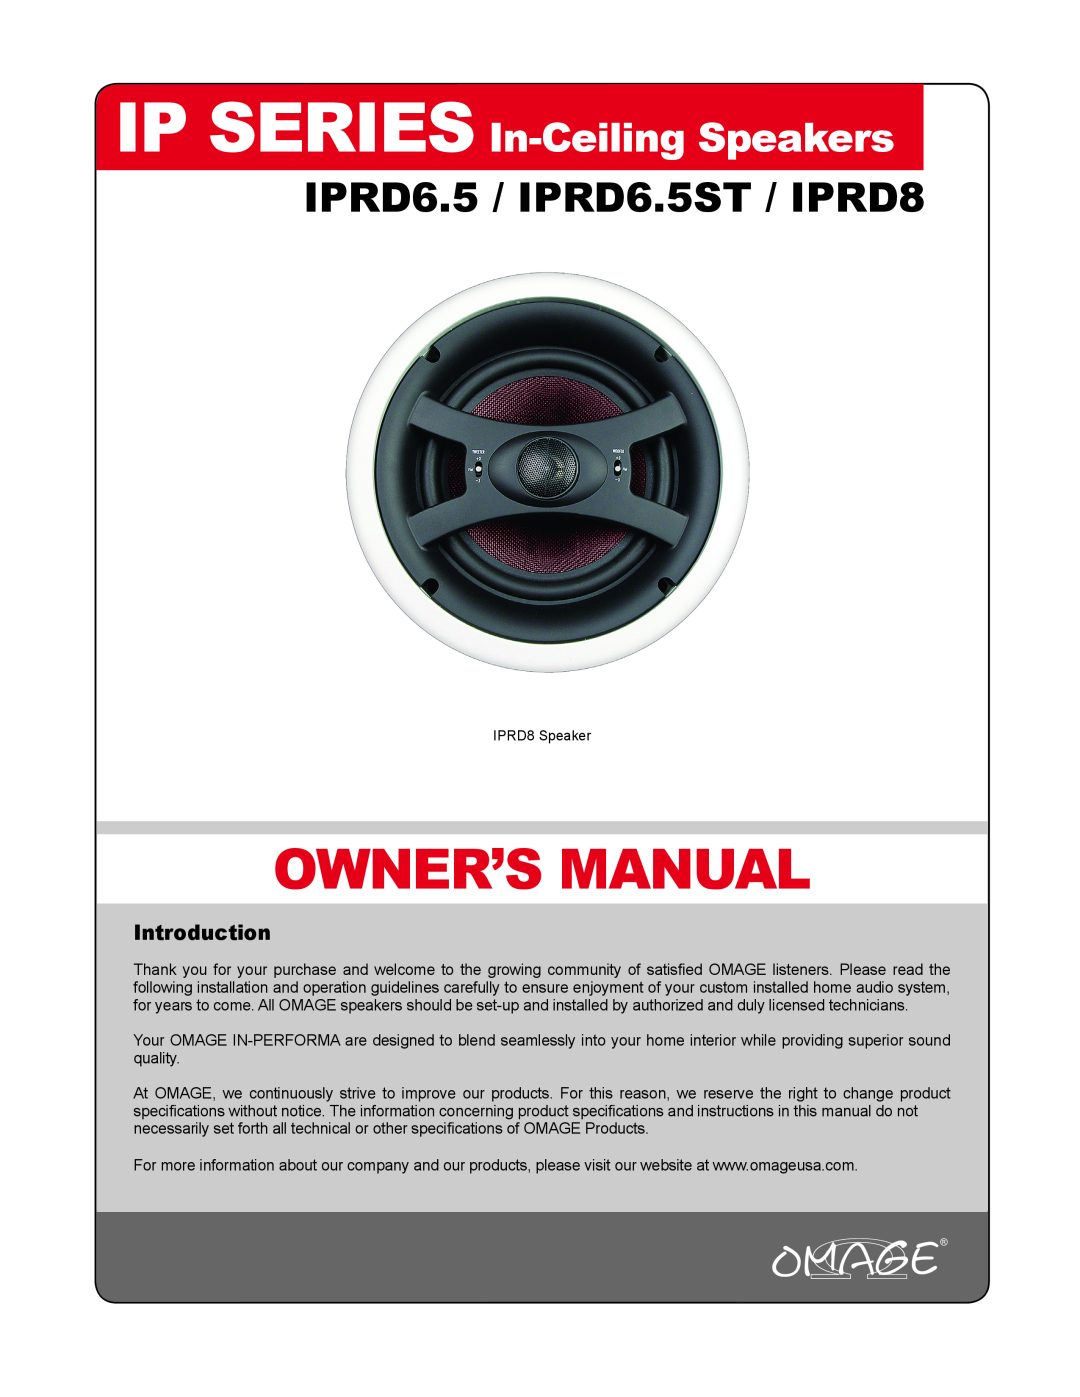 Omage owner manual Introduction, IPRD6.5 / IPRD6.5ST / IPRD8 